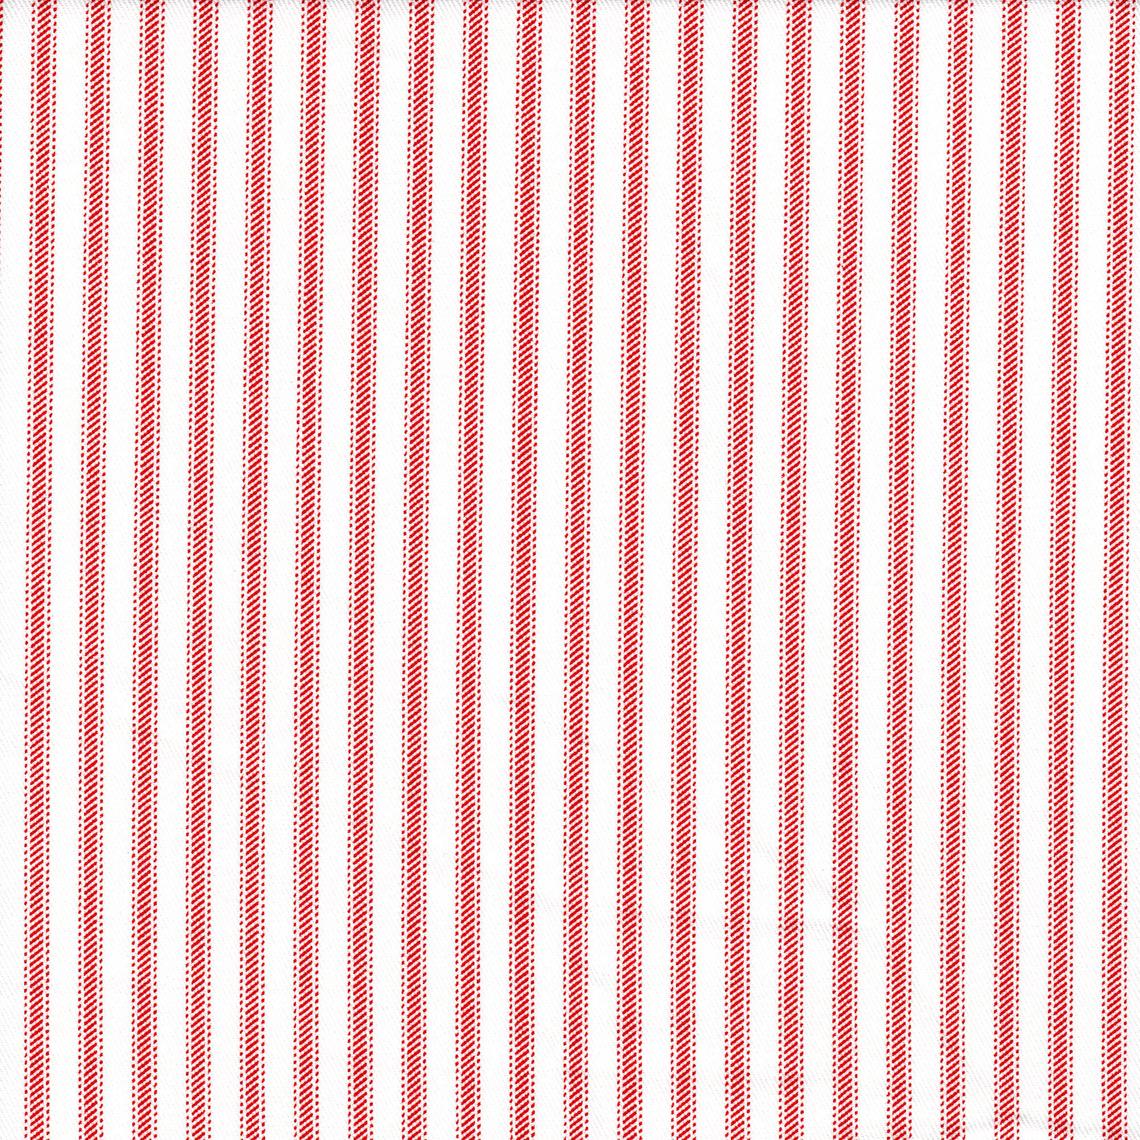 tie-up valance in classic lipstick red ticking stripe on white